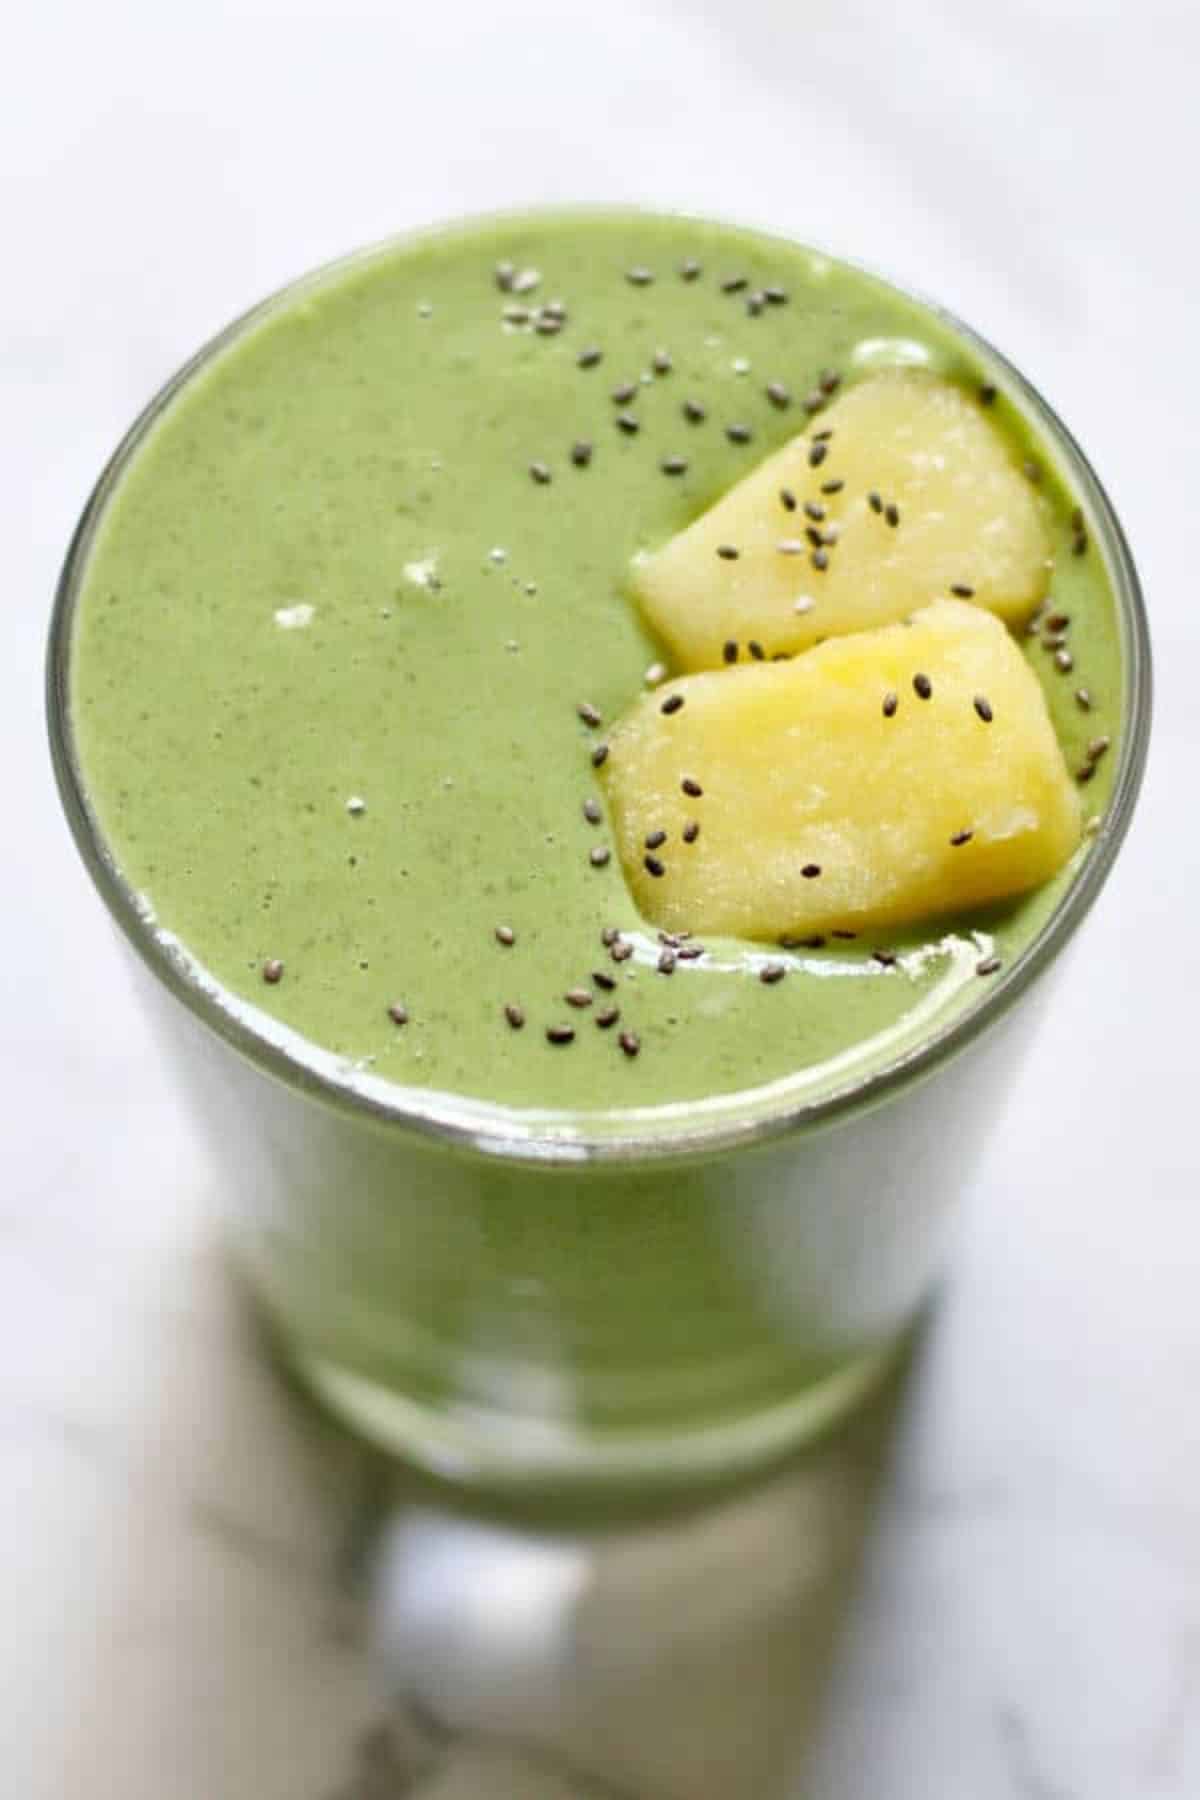 Healthy kale and pineapple smoothie in a glass cup.